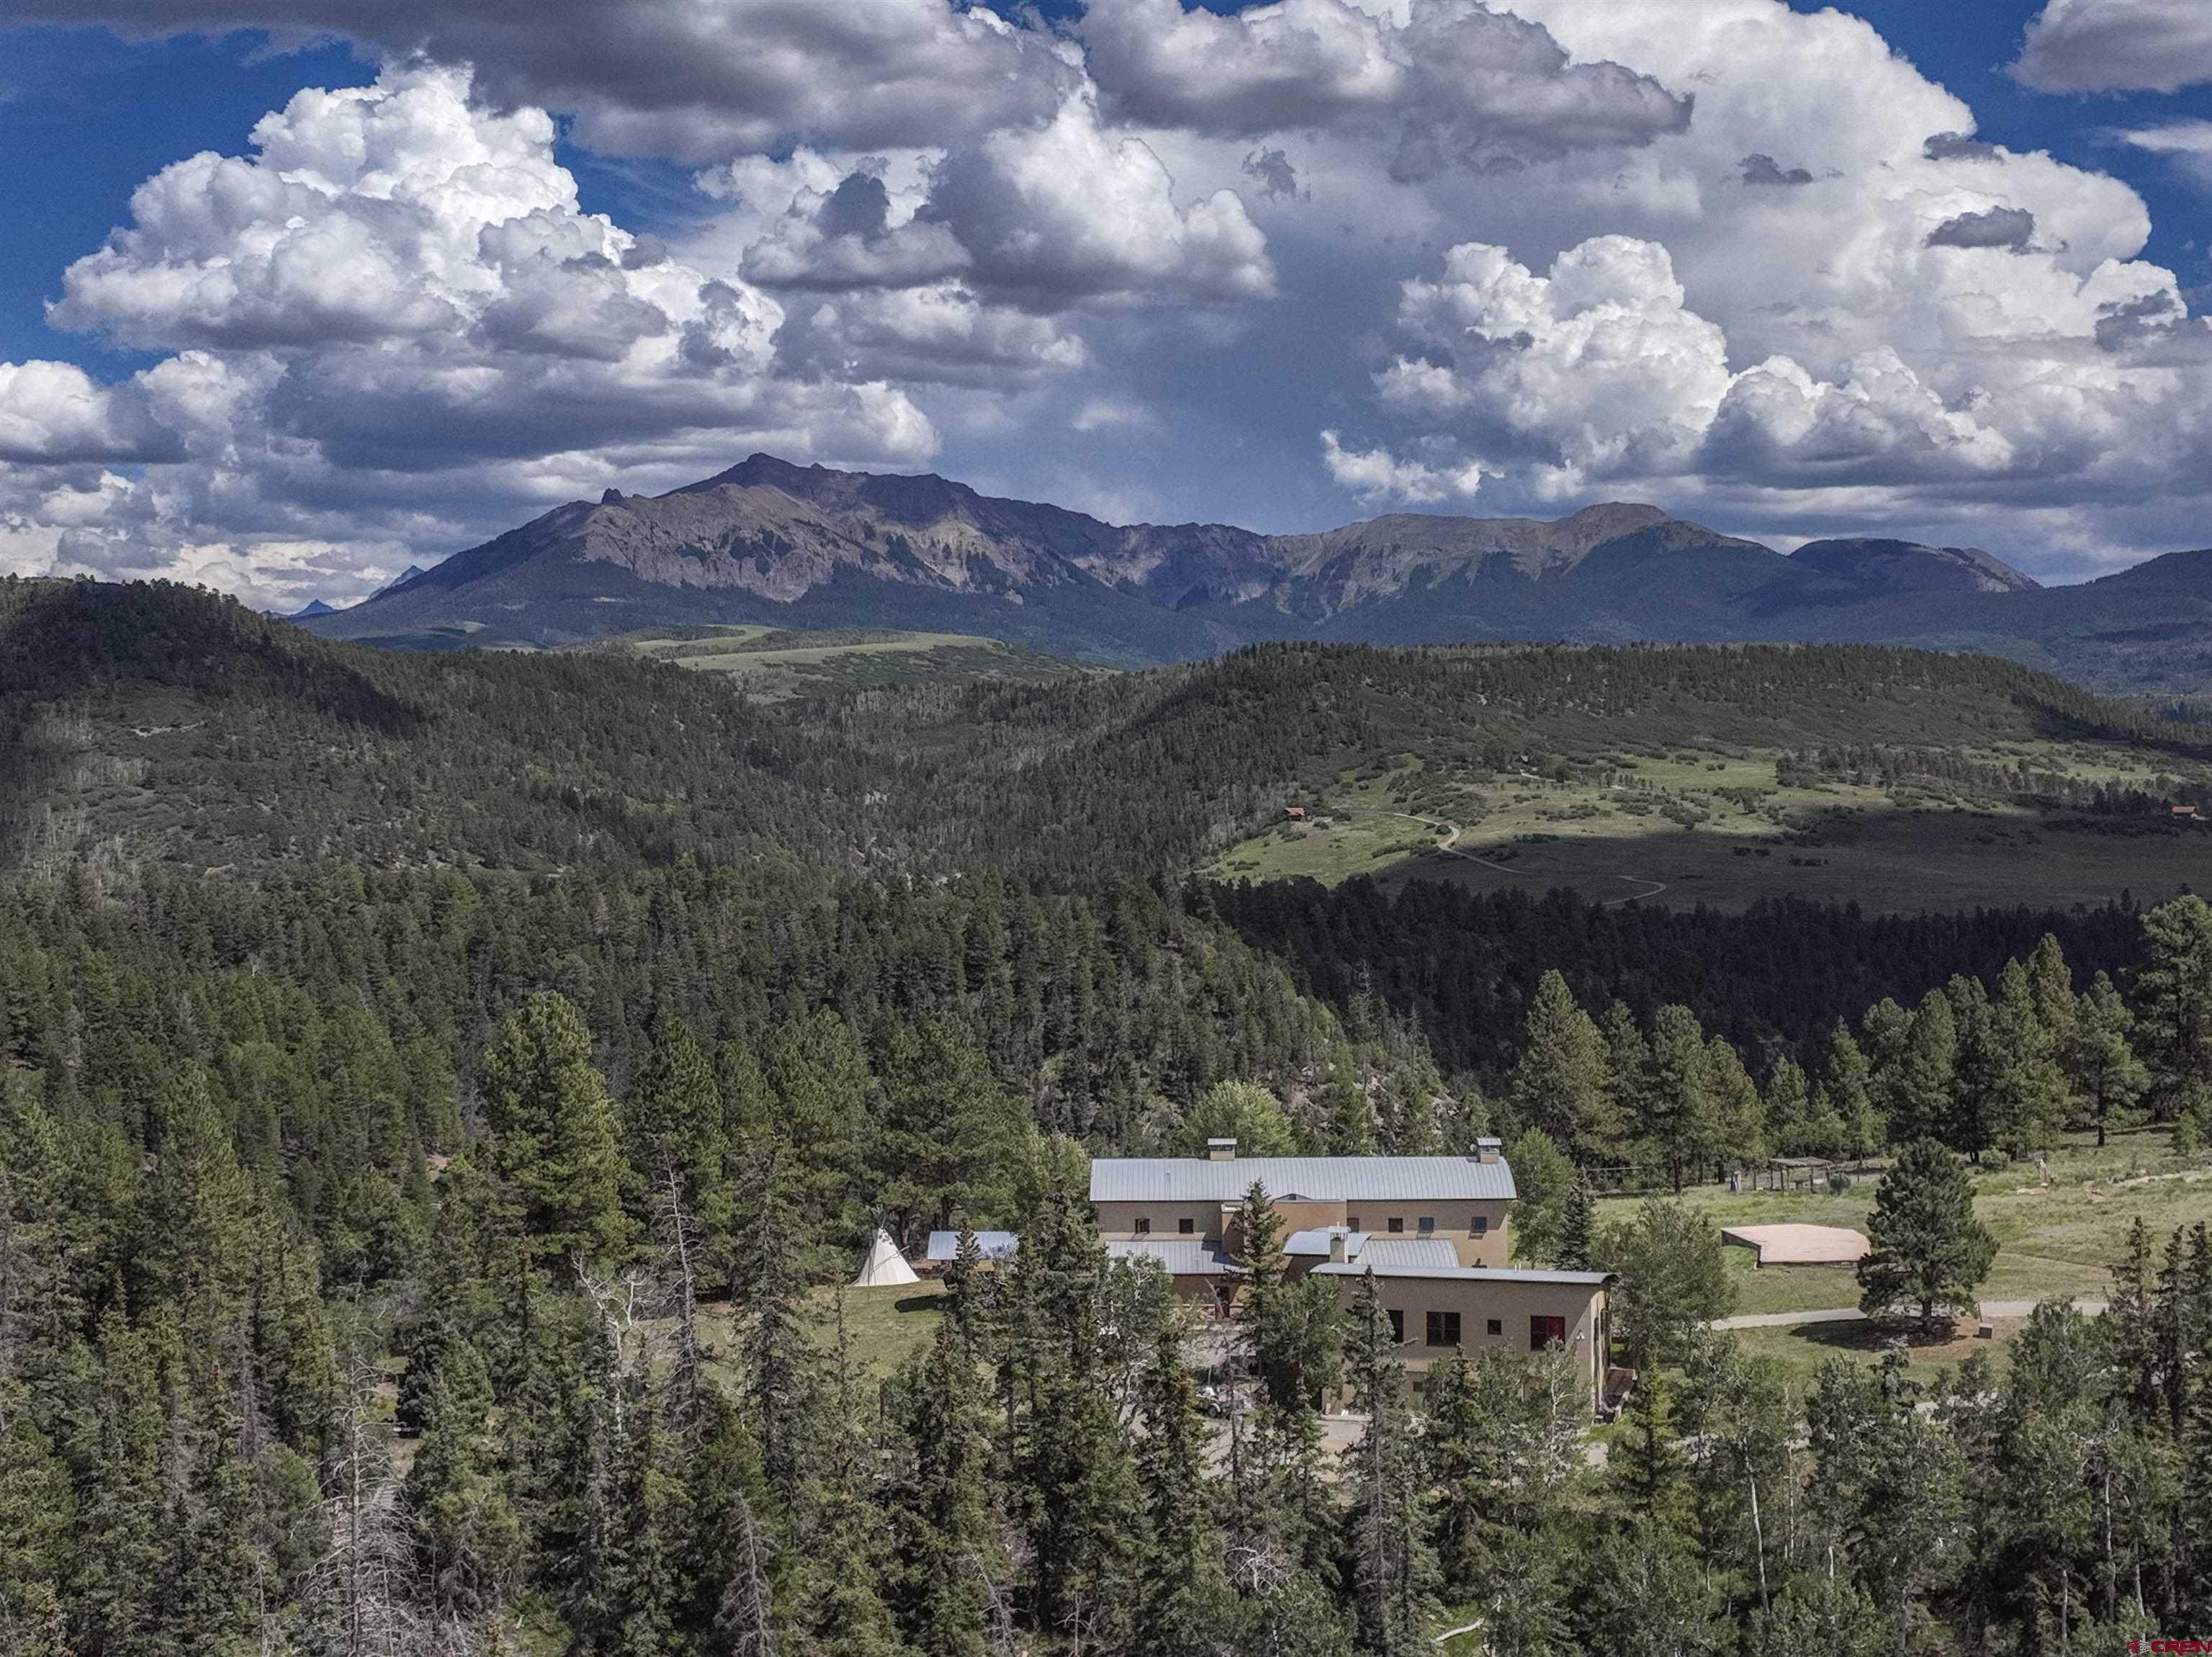 * Please note there is no HOA and this home is Short Term Rental friendly. Perched in a beautiful meadow overlooking the incredible San Juan mountains, this contemporary Lipkin-Warner sanctuary basques in the Colorado sunshine in complete privacy. The light filled home features a 5 bedroom main house and a 2 bedroom guest house / caretakers quarters on 38 rolling acres. With 7,617 square feet, 2 master bedrooms, and a 3 car garage this property has everything you need for your family compound. Located just 30 minutes to Telluride and perfectly situated to all this area has to offer.